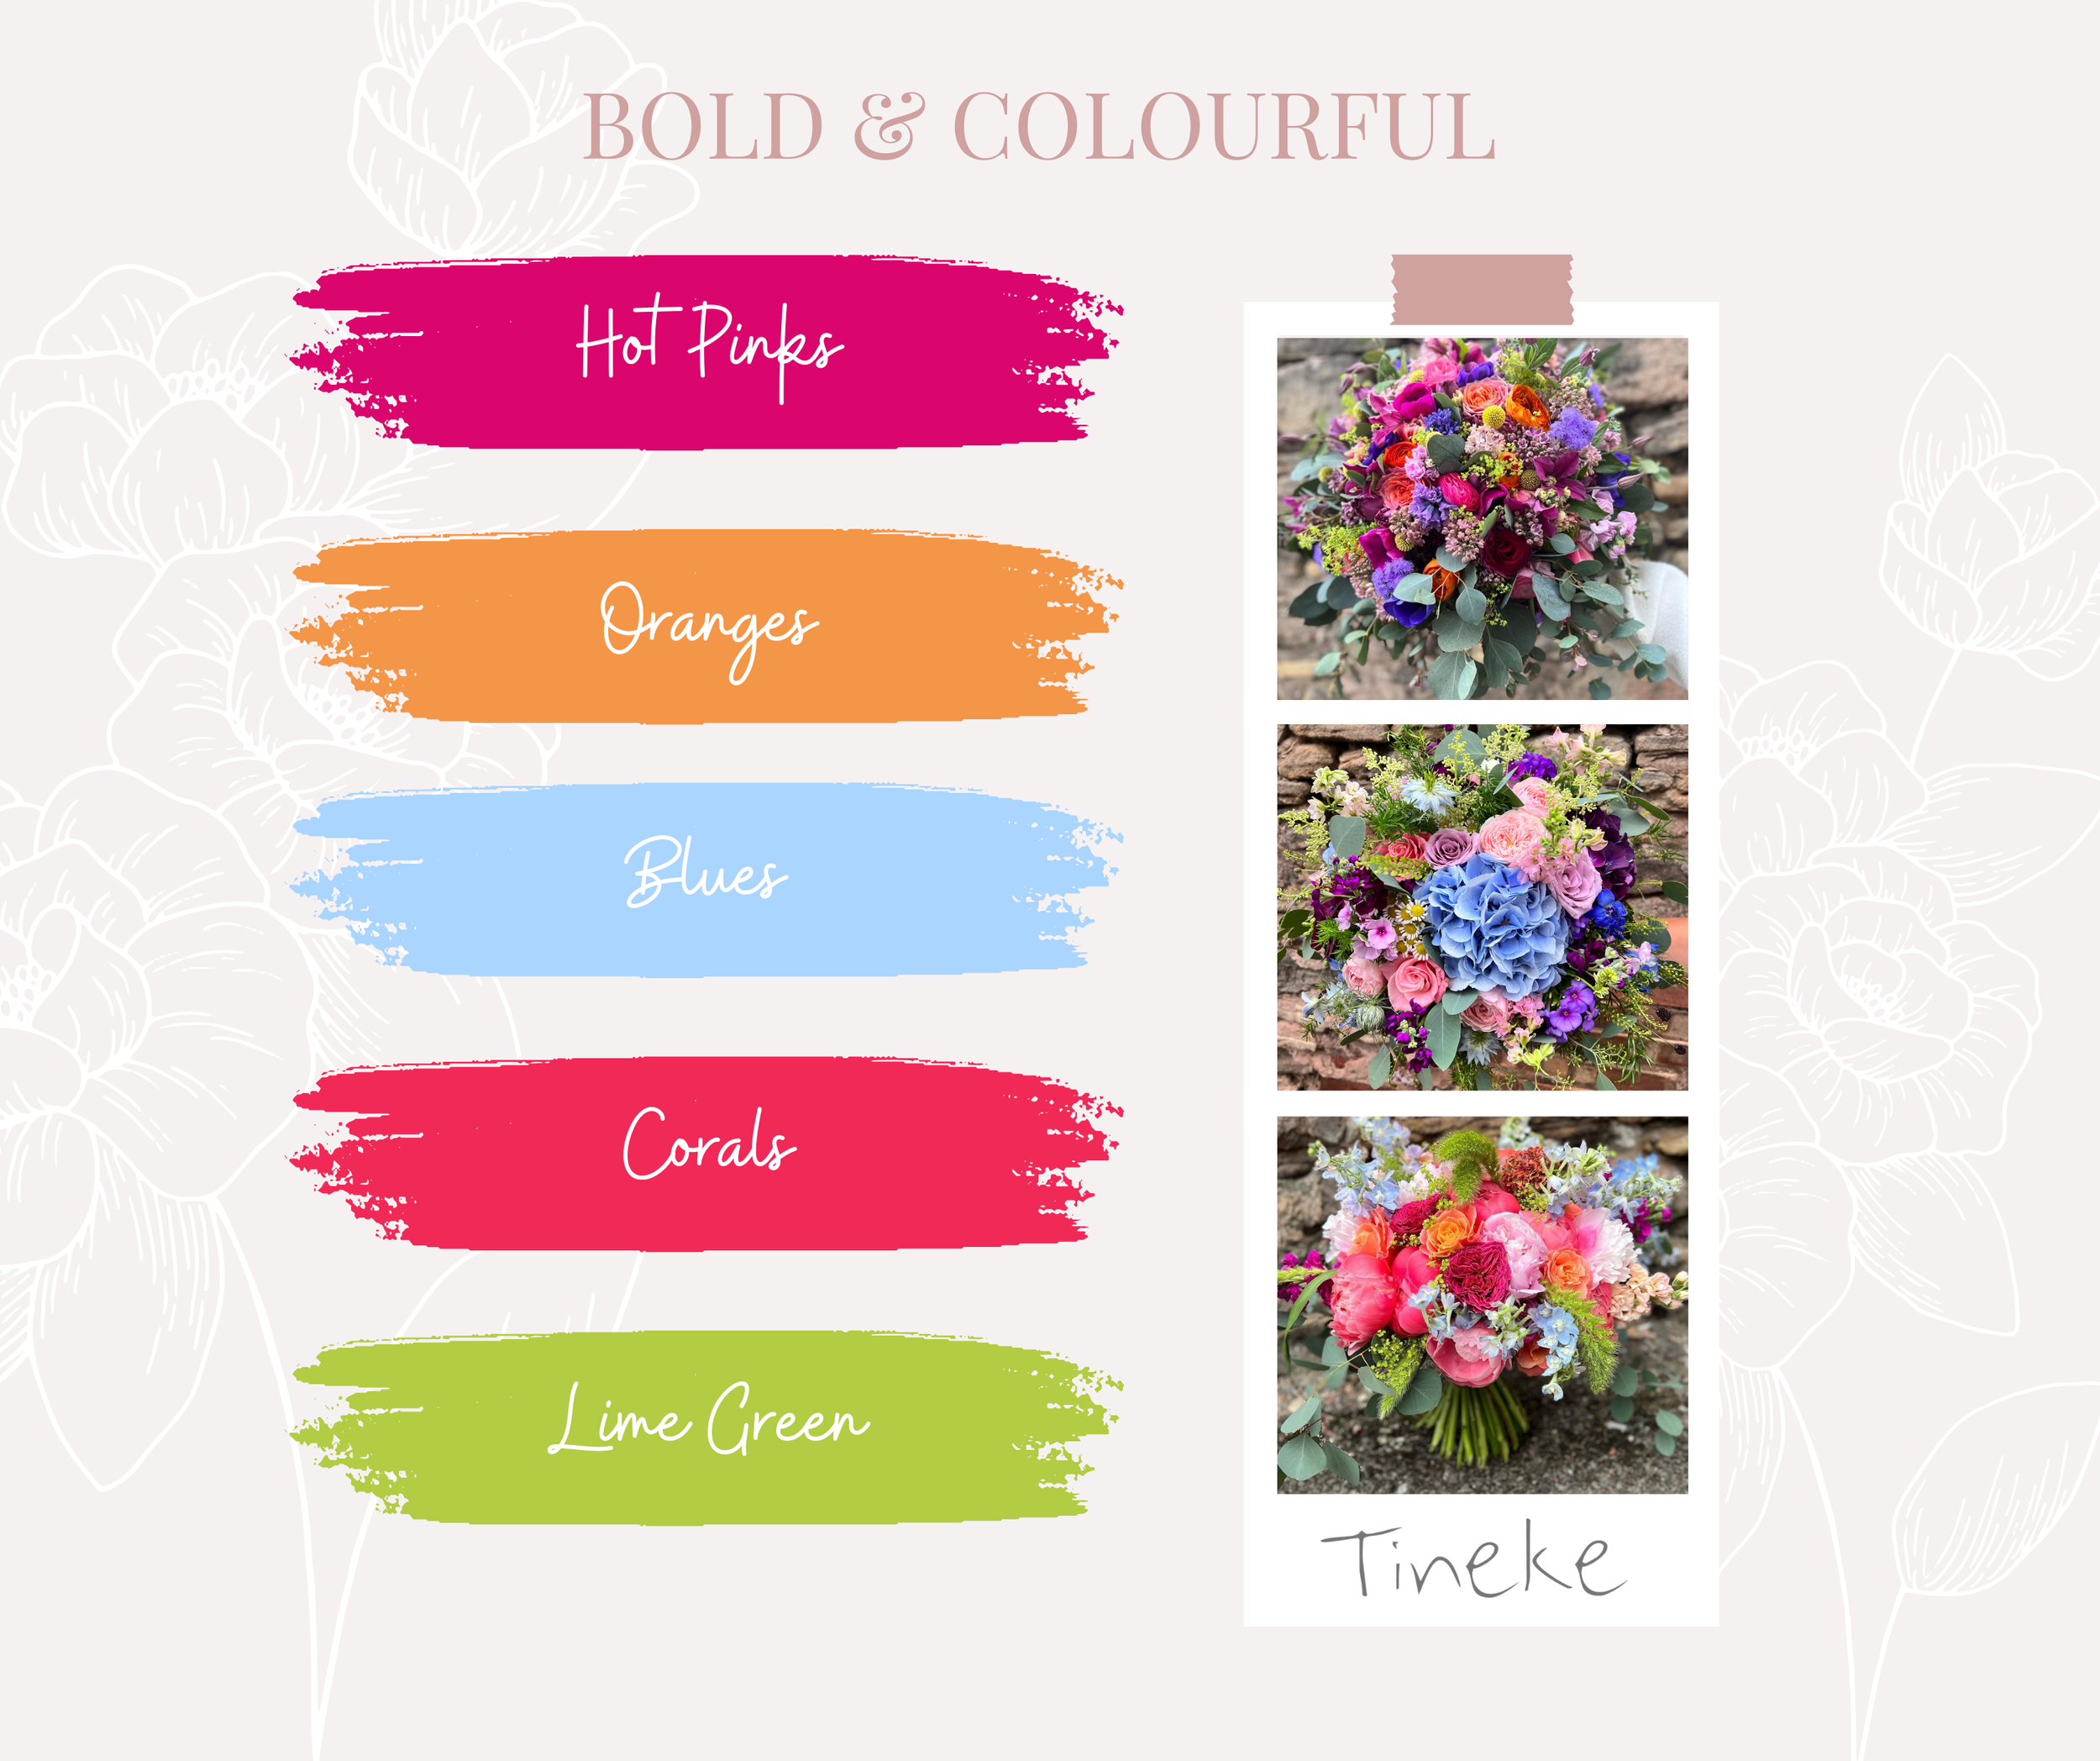 Copy of Copy of Palette Branding Colour Board Facebook Post.png